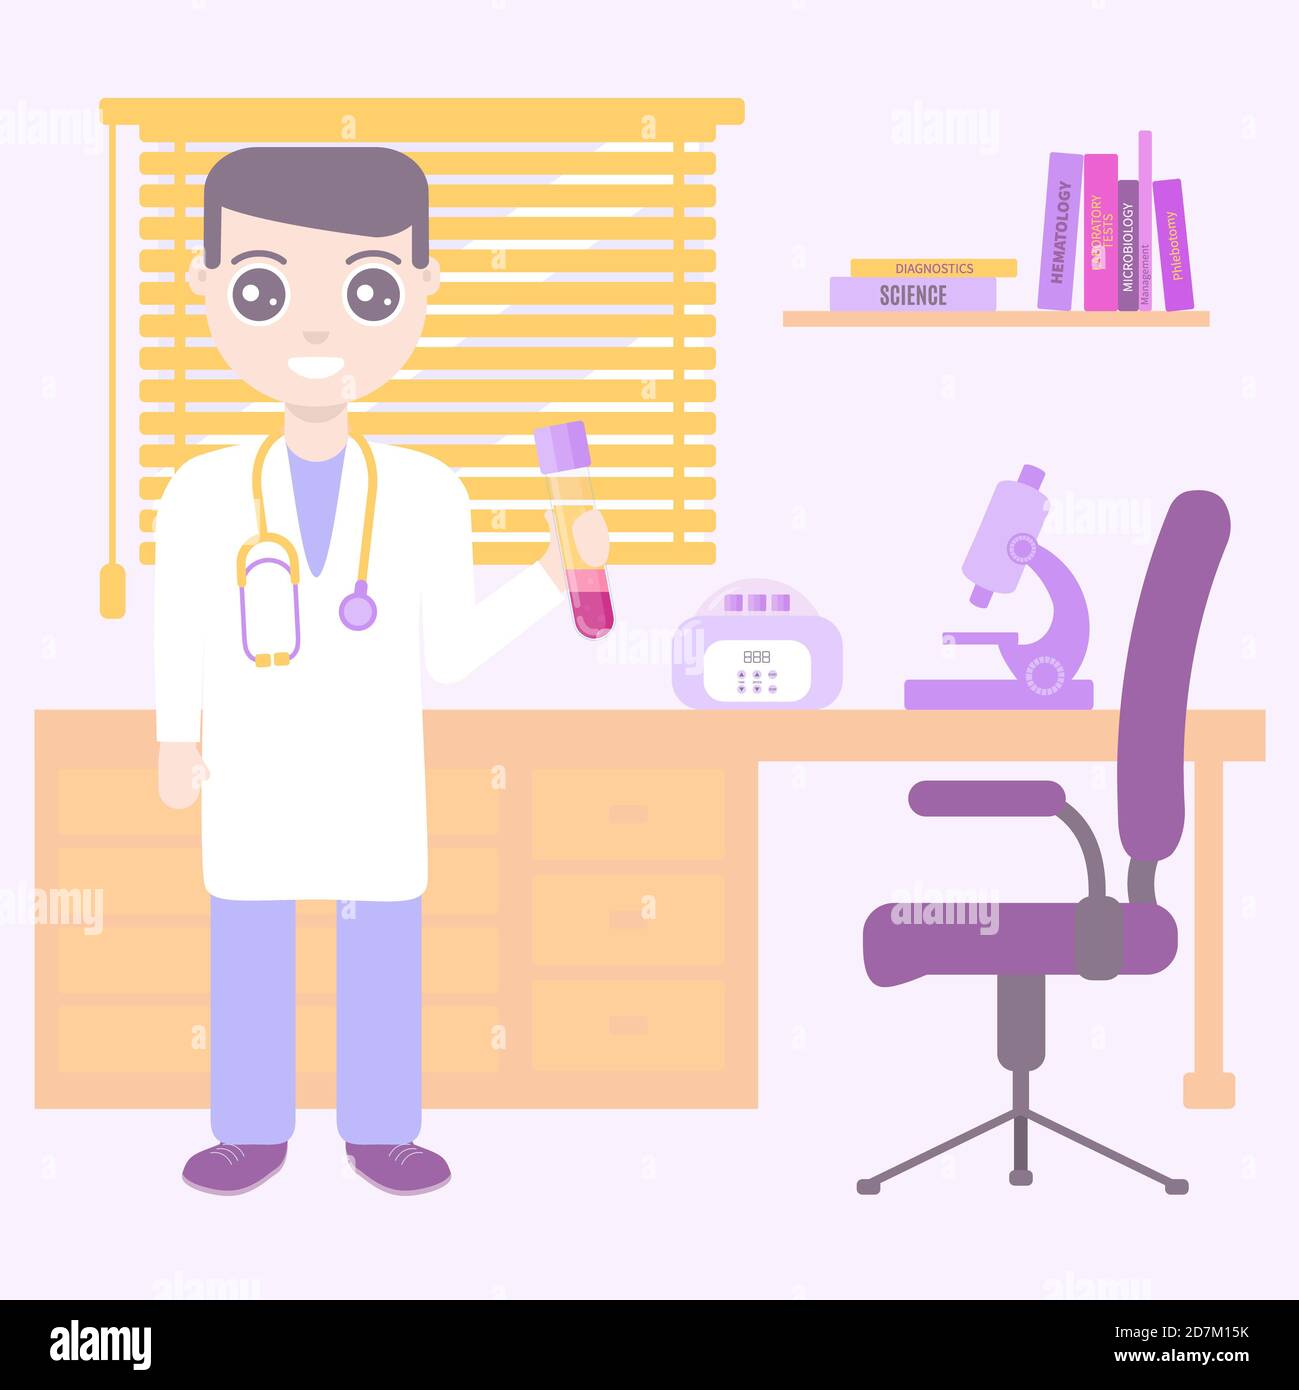 Medical research, conceptual illustration. Stock Photo